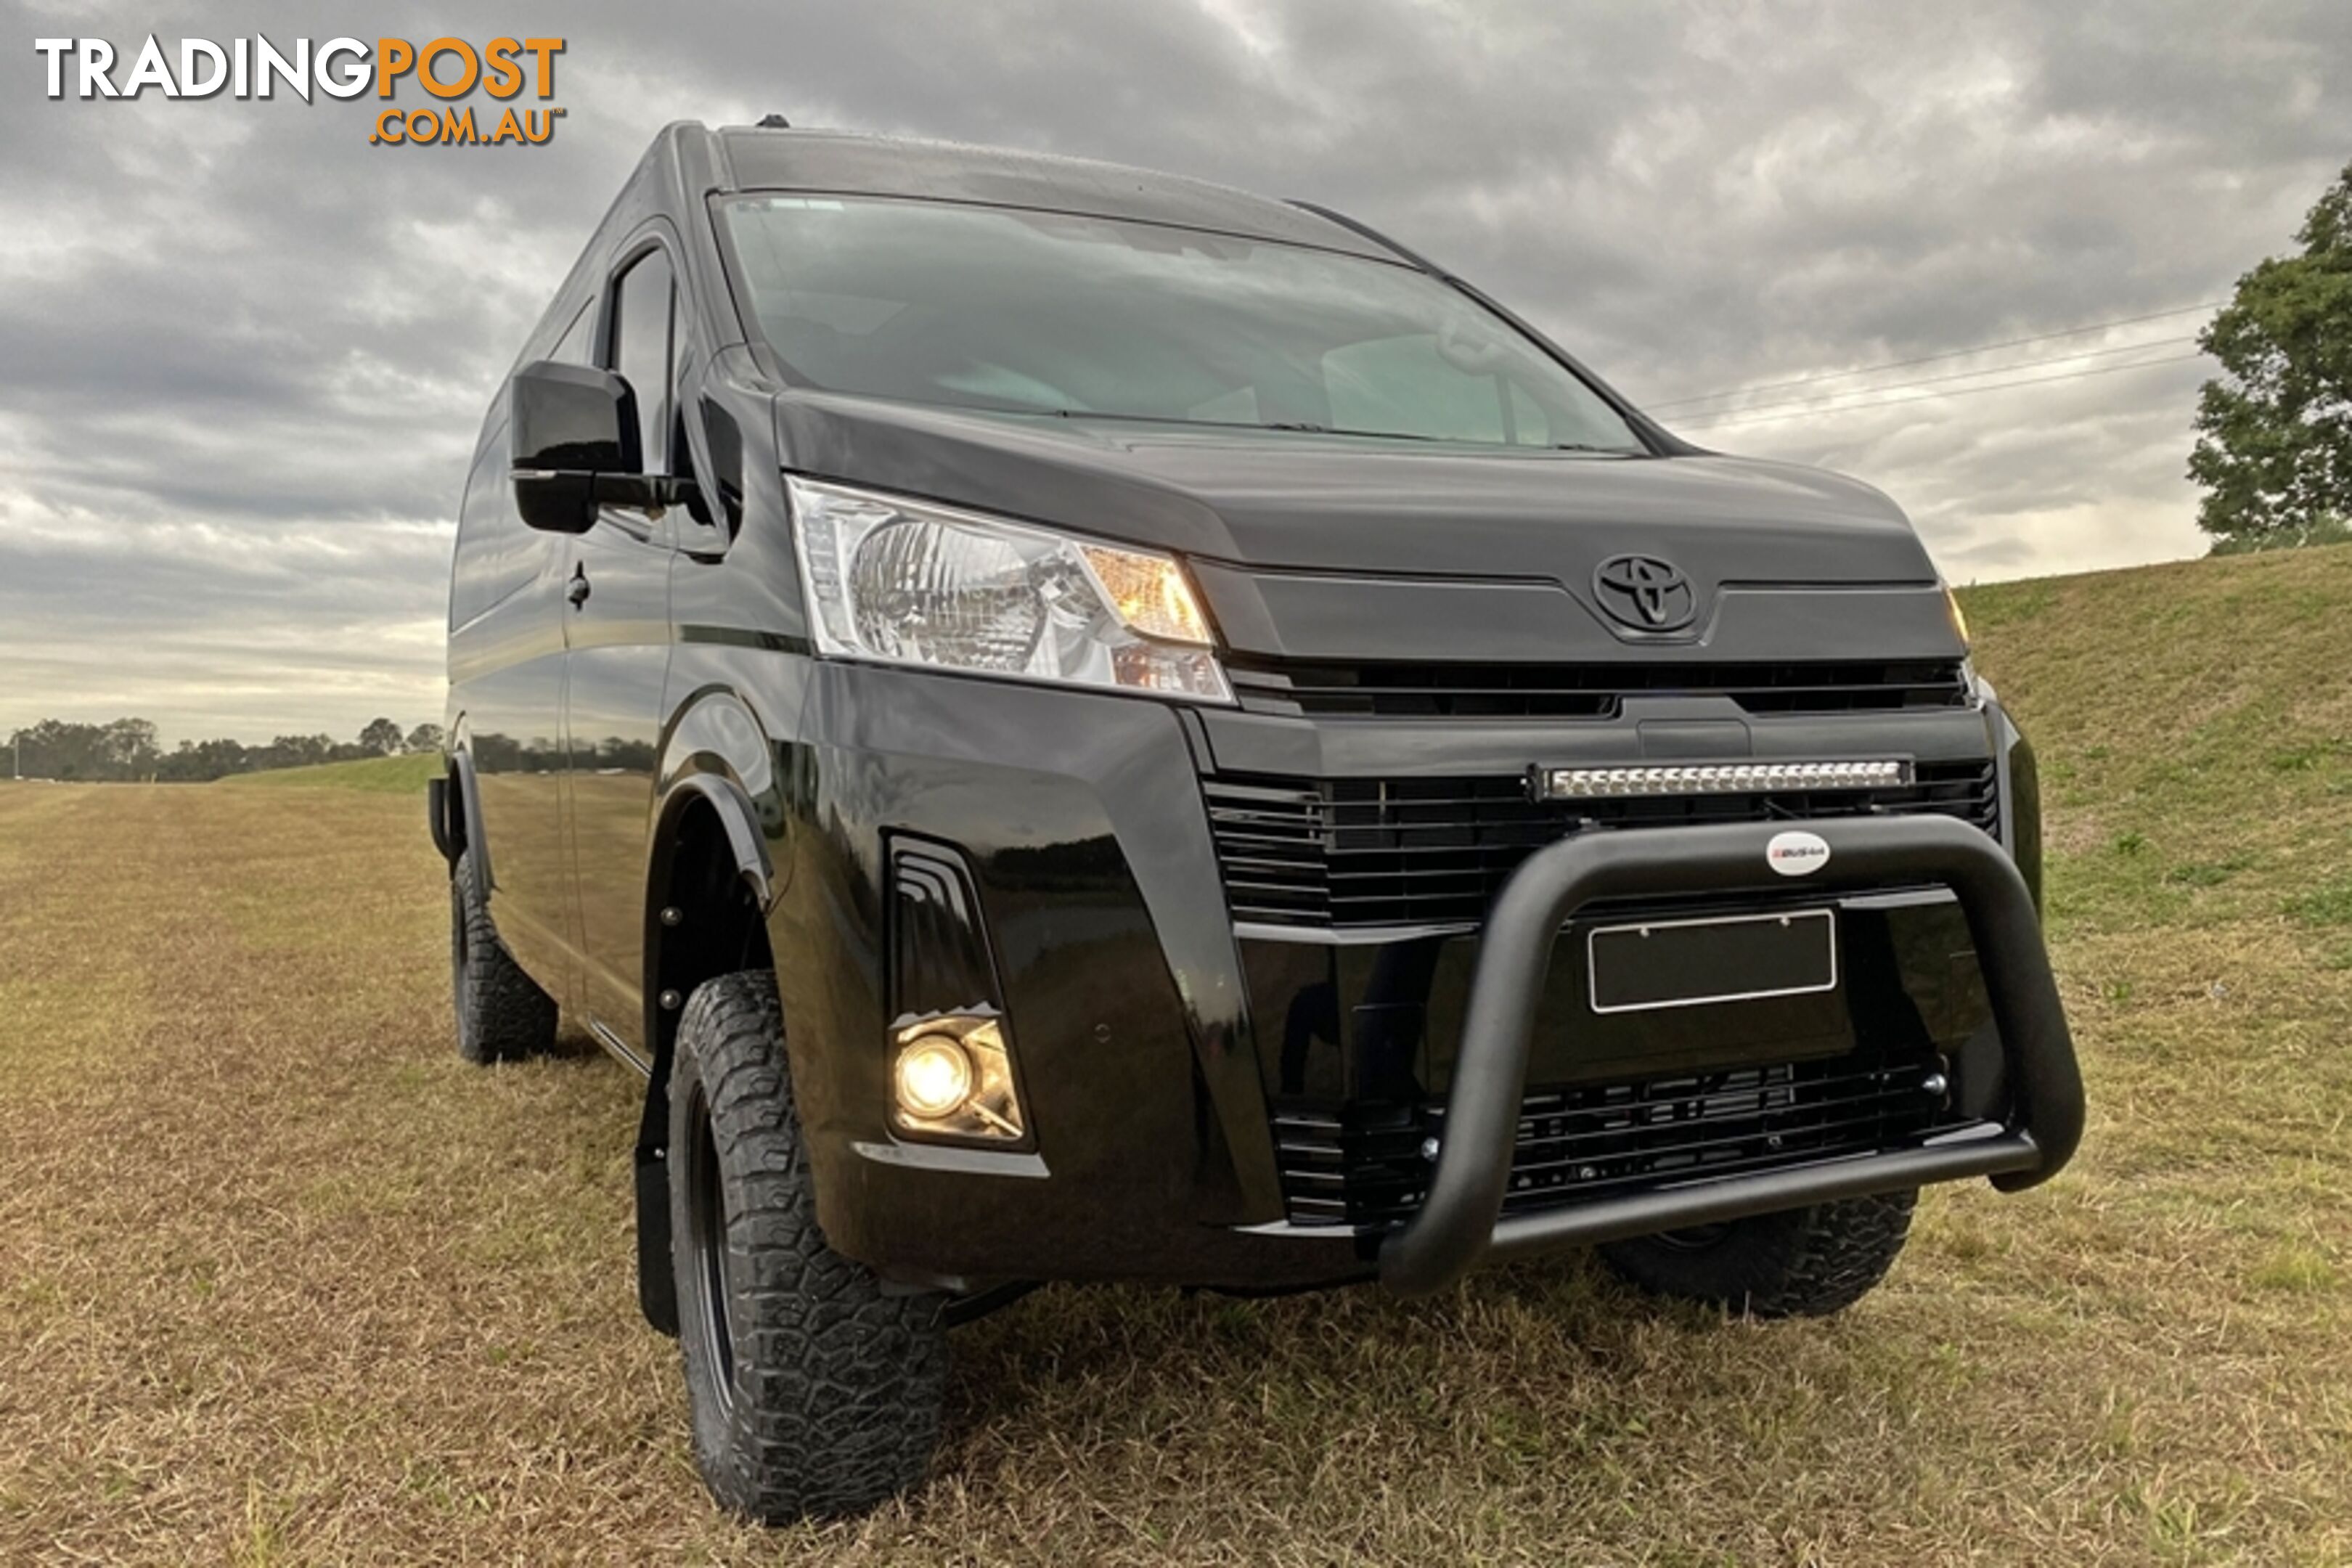 BUS 4x4 2WD CONVERSION OF HIACE